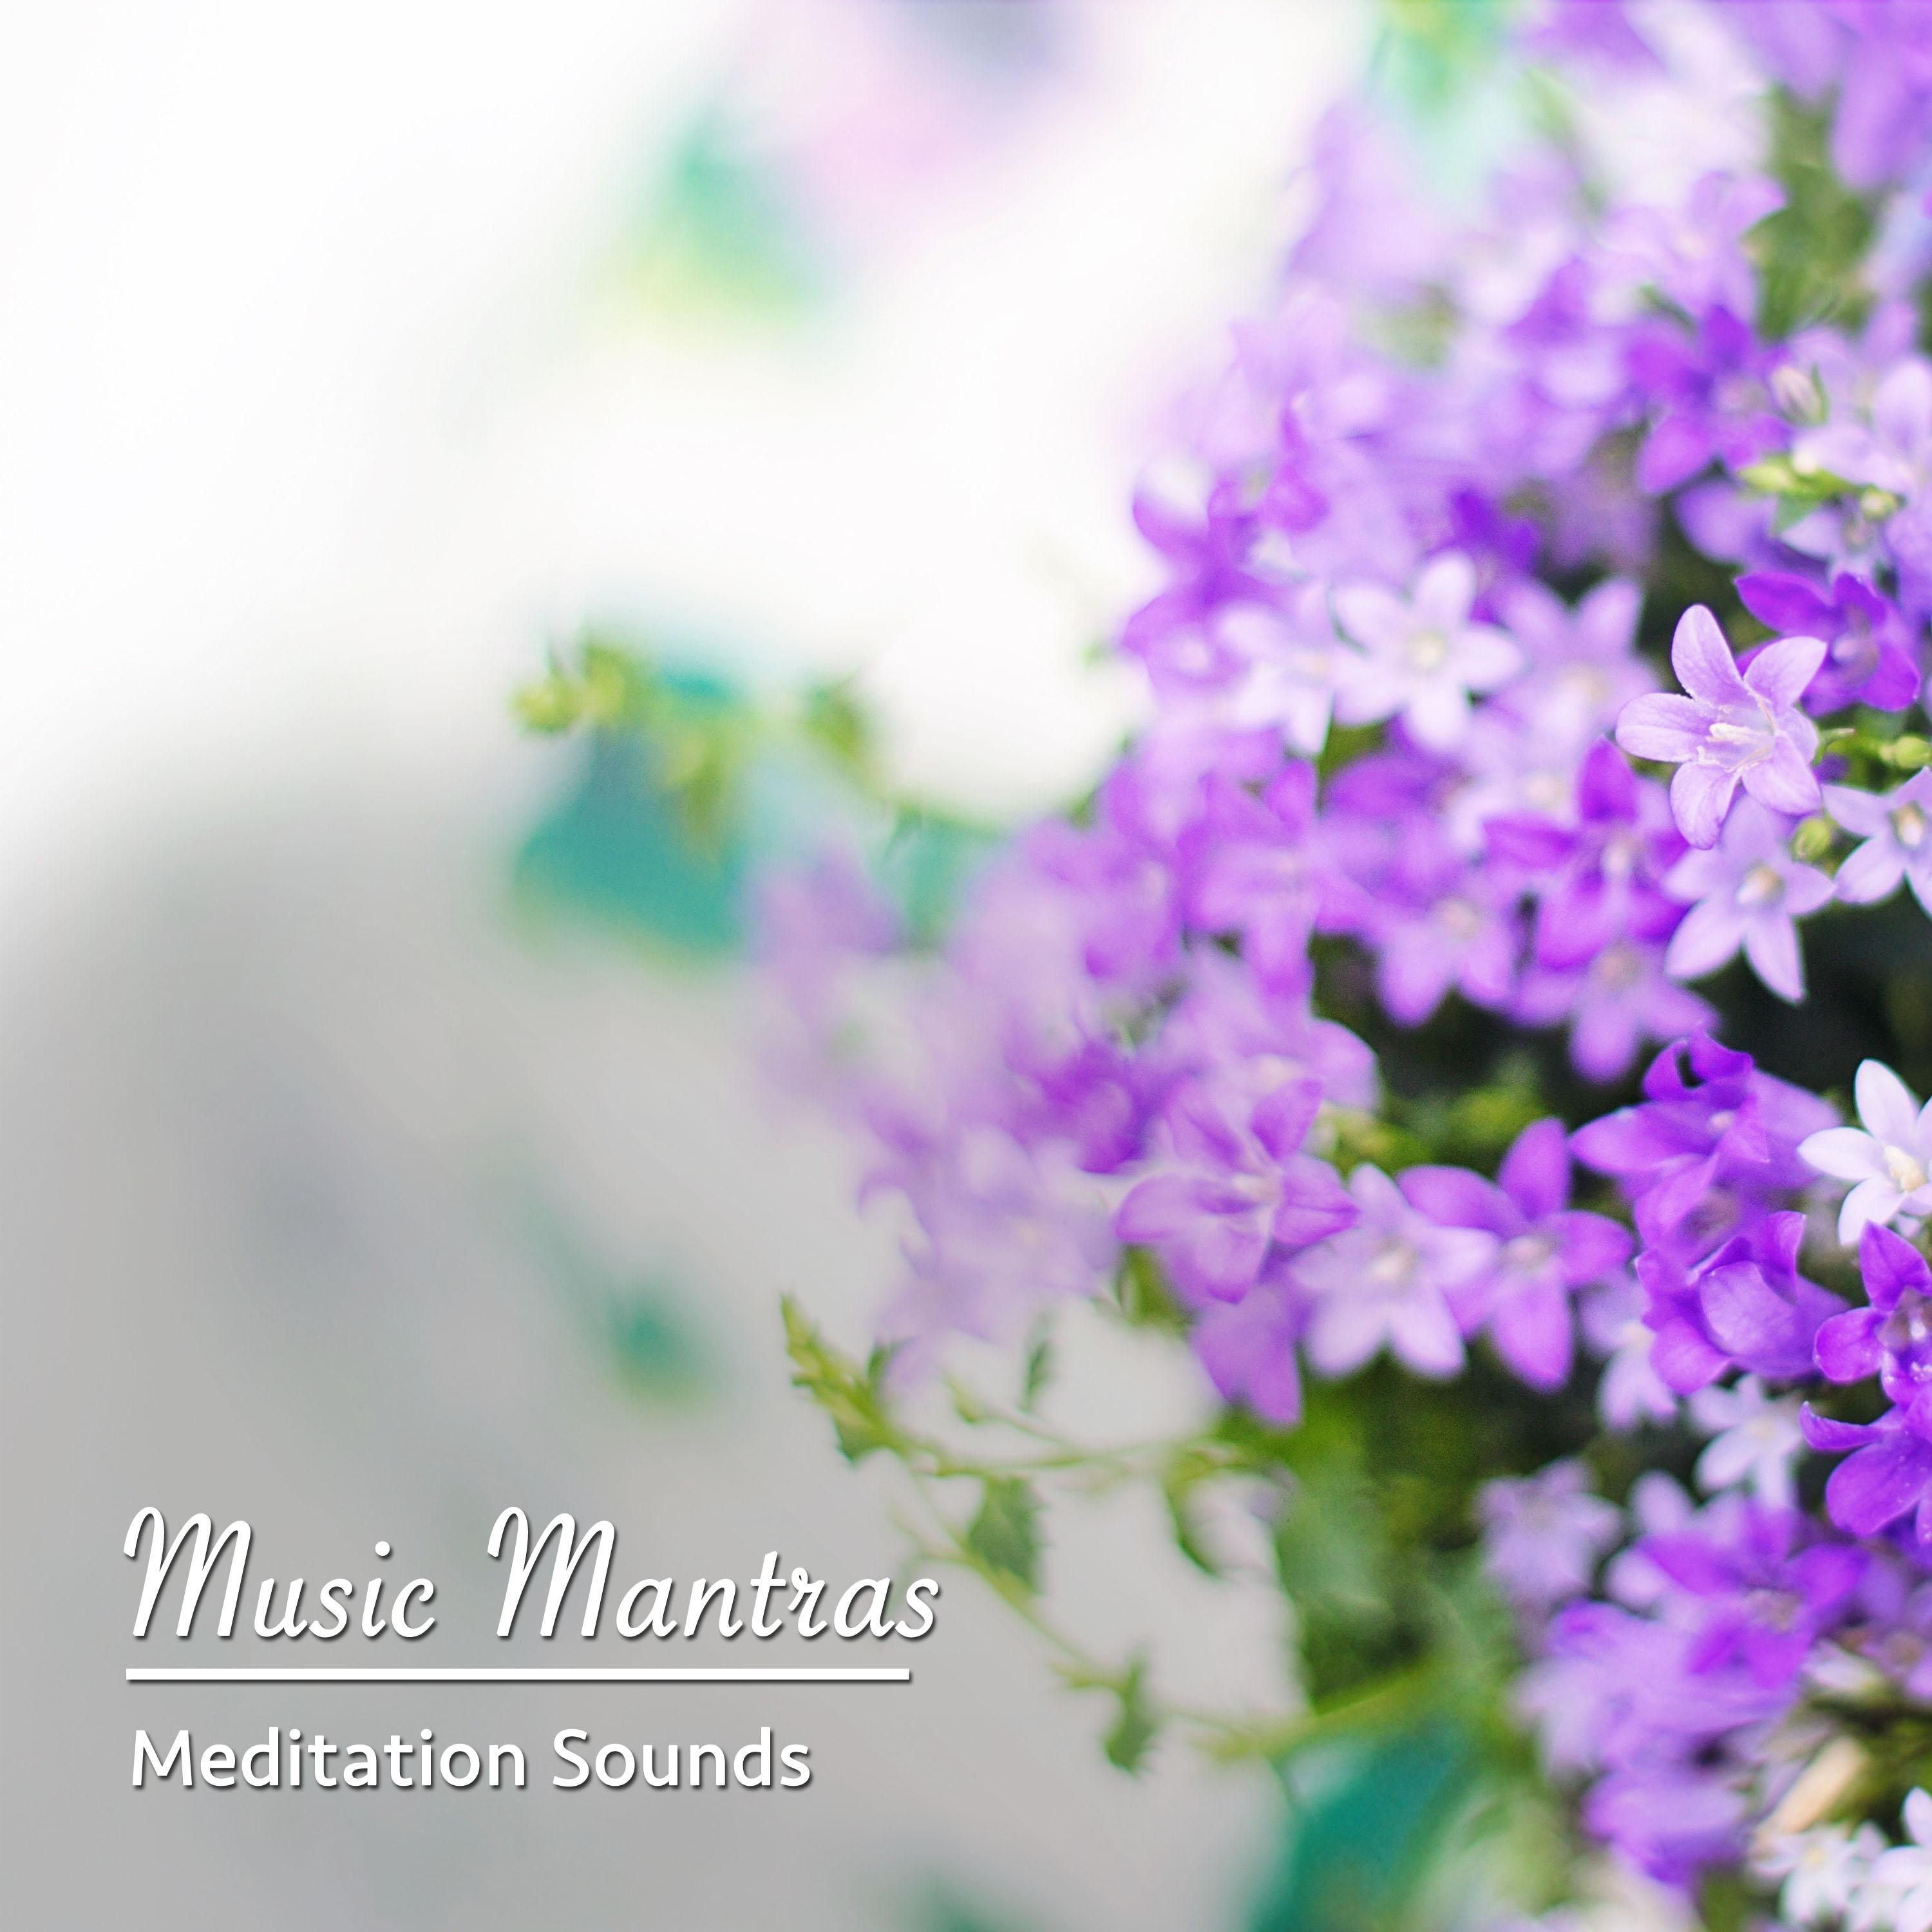 11 Relaxing Meditation Sounds: Music Mantras